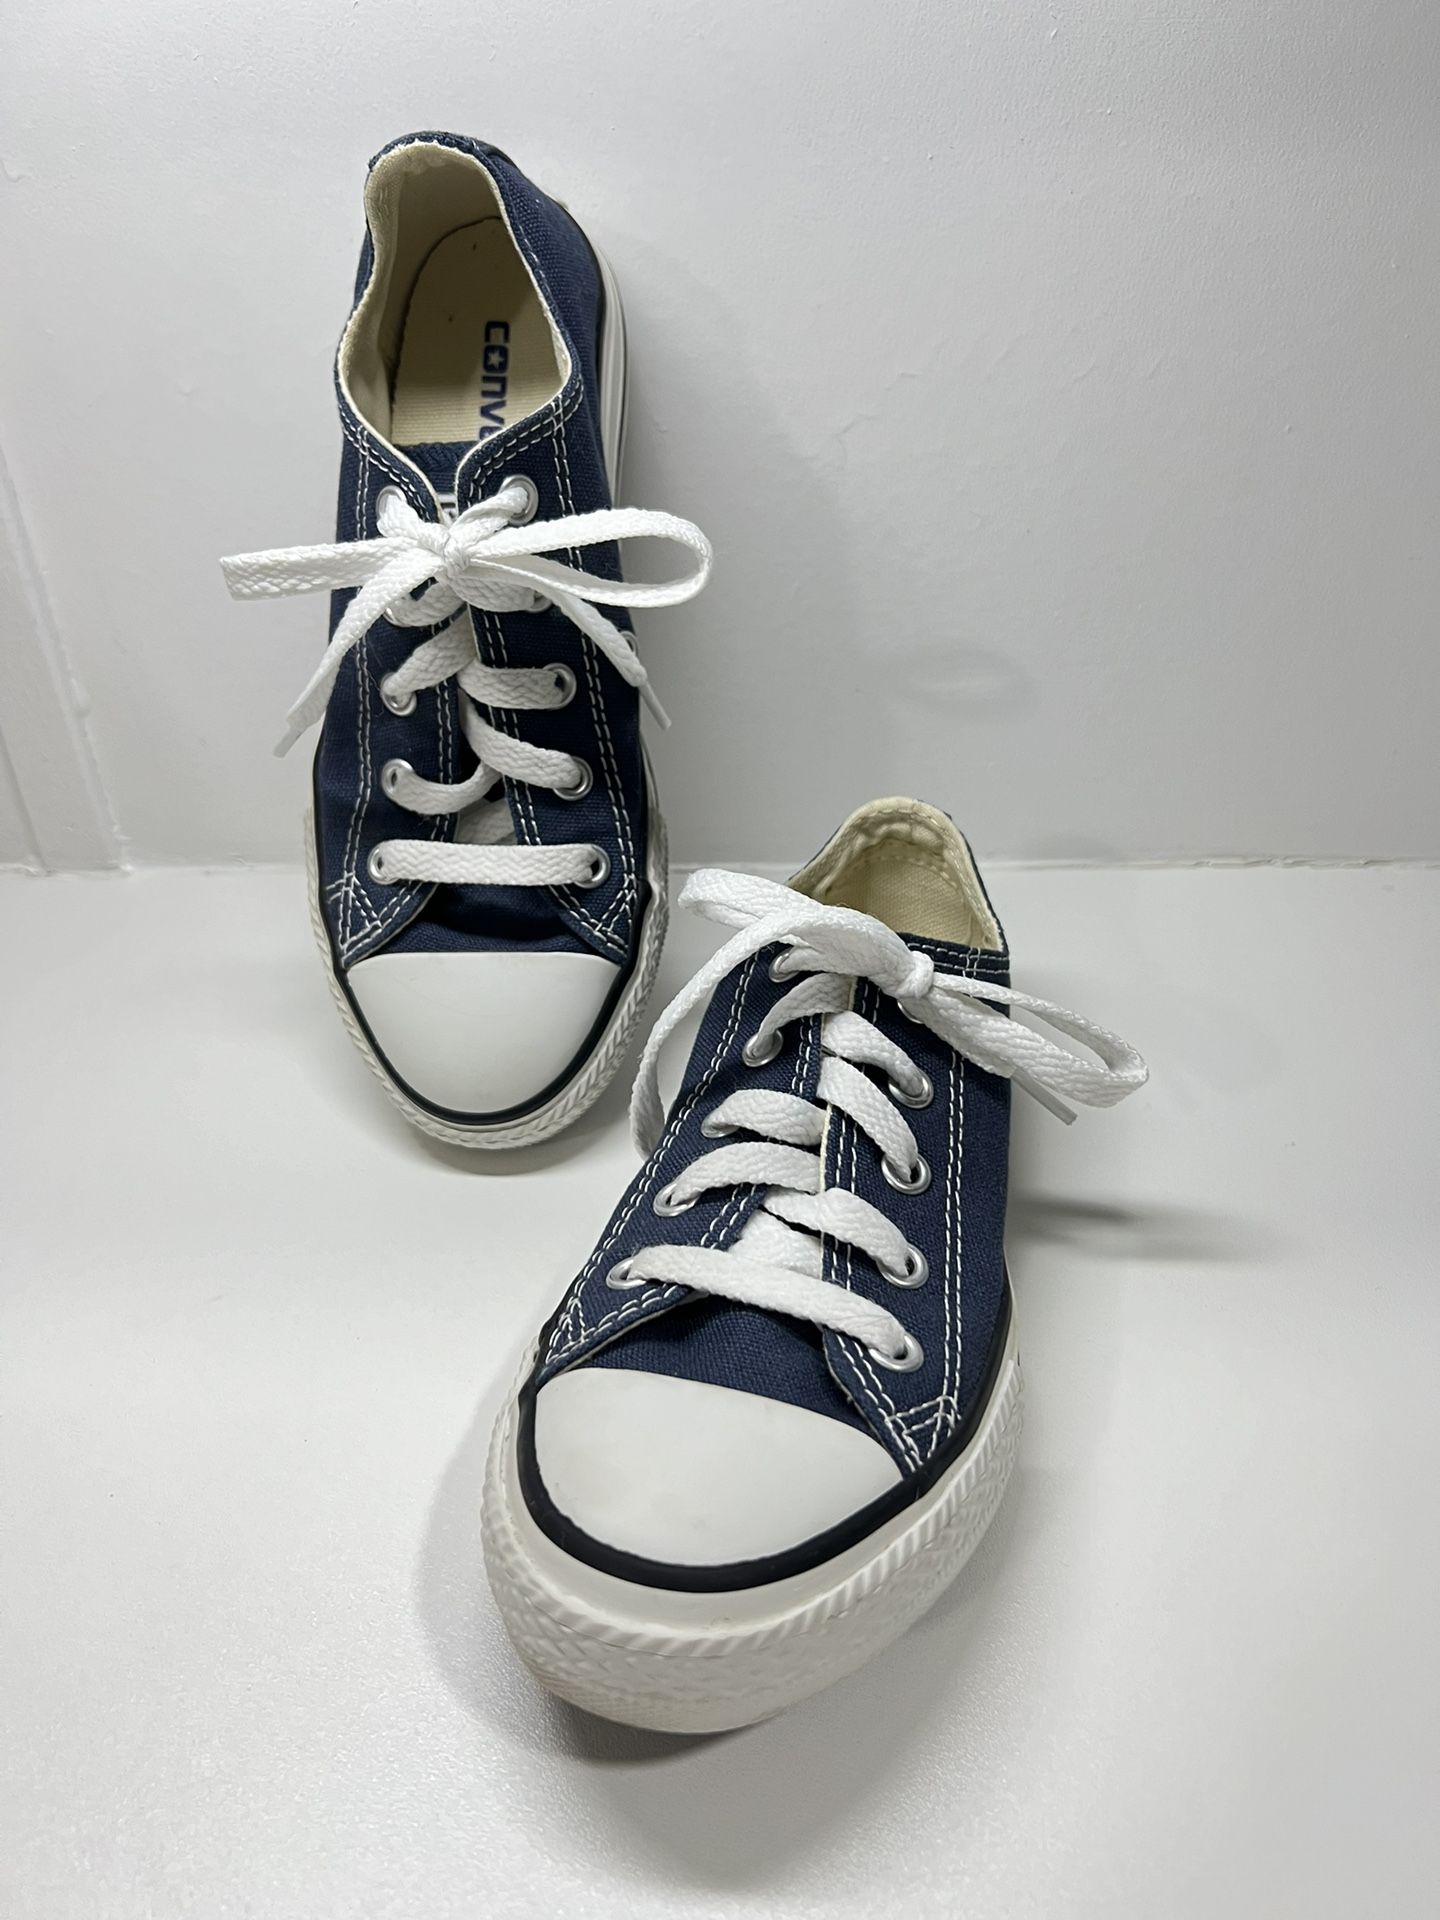 Converse  Kids youth 13 Converse low top blue white canvas sneakers shoes classic boy girl